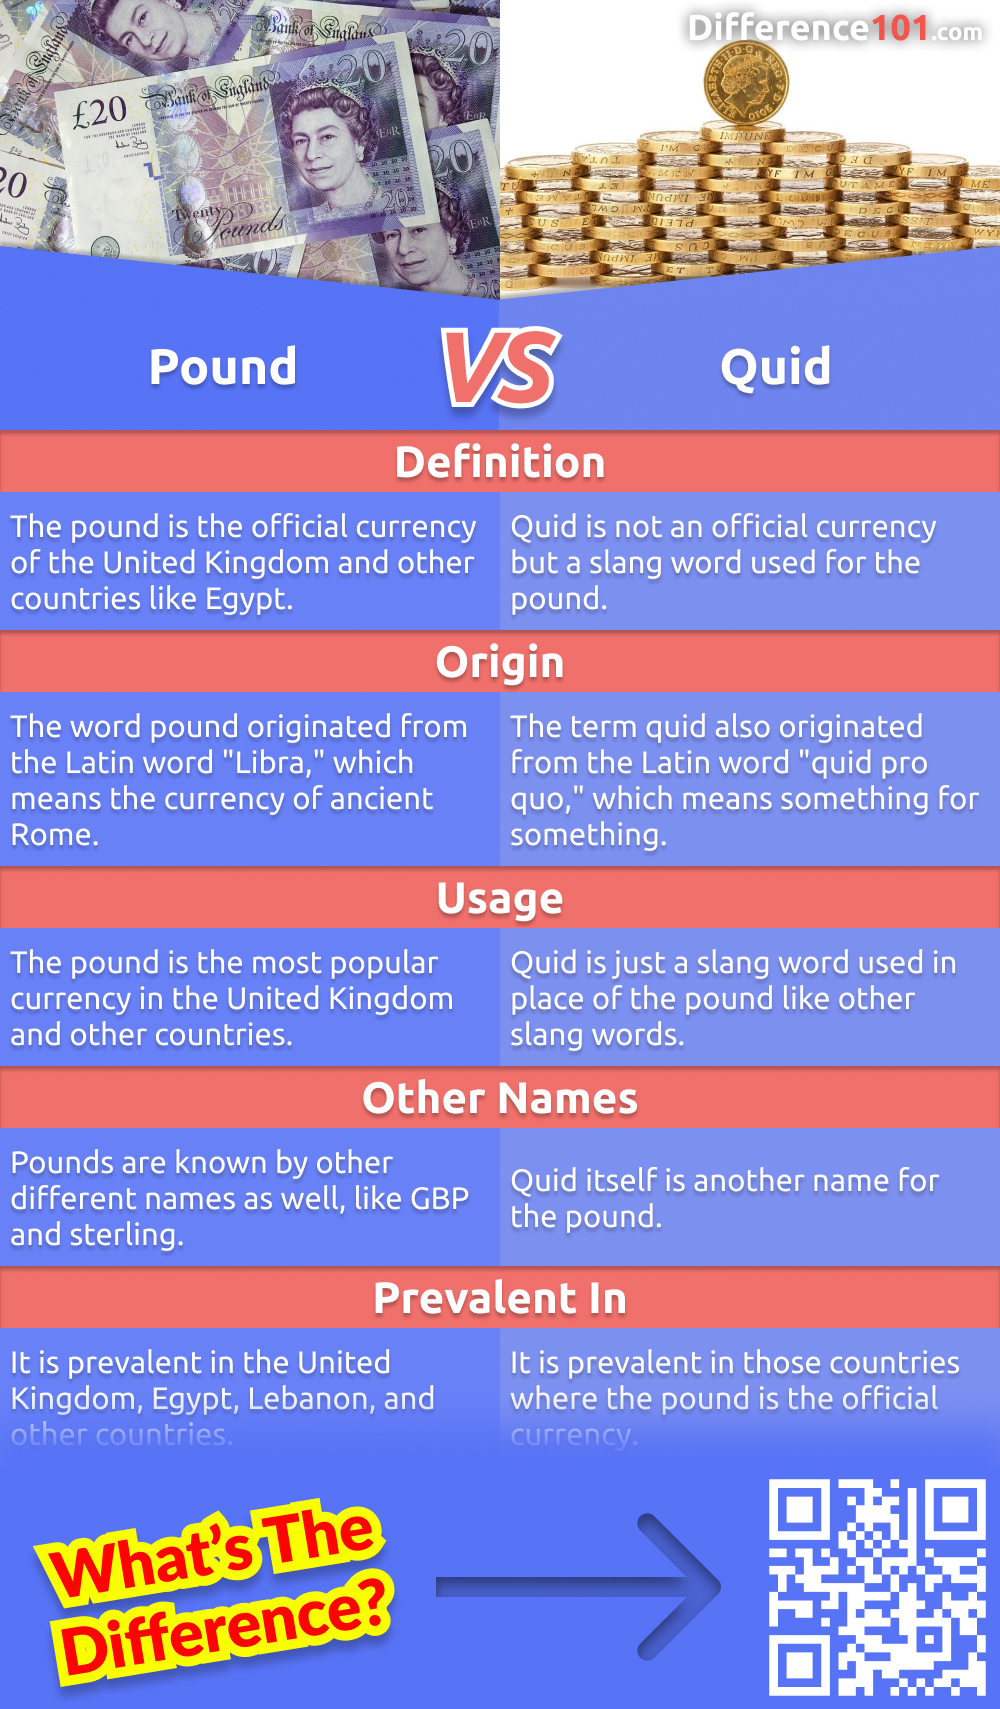 What is the difference between a pound and a quid? They both have different meanings depending on where you are in the world. Read on to learn more.